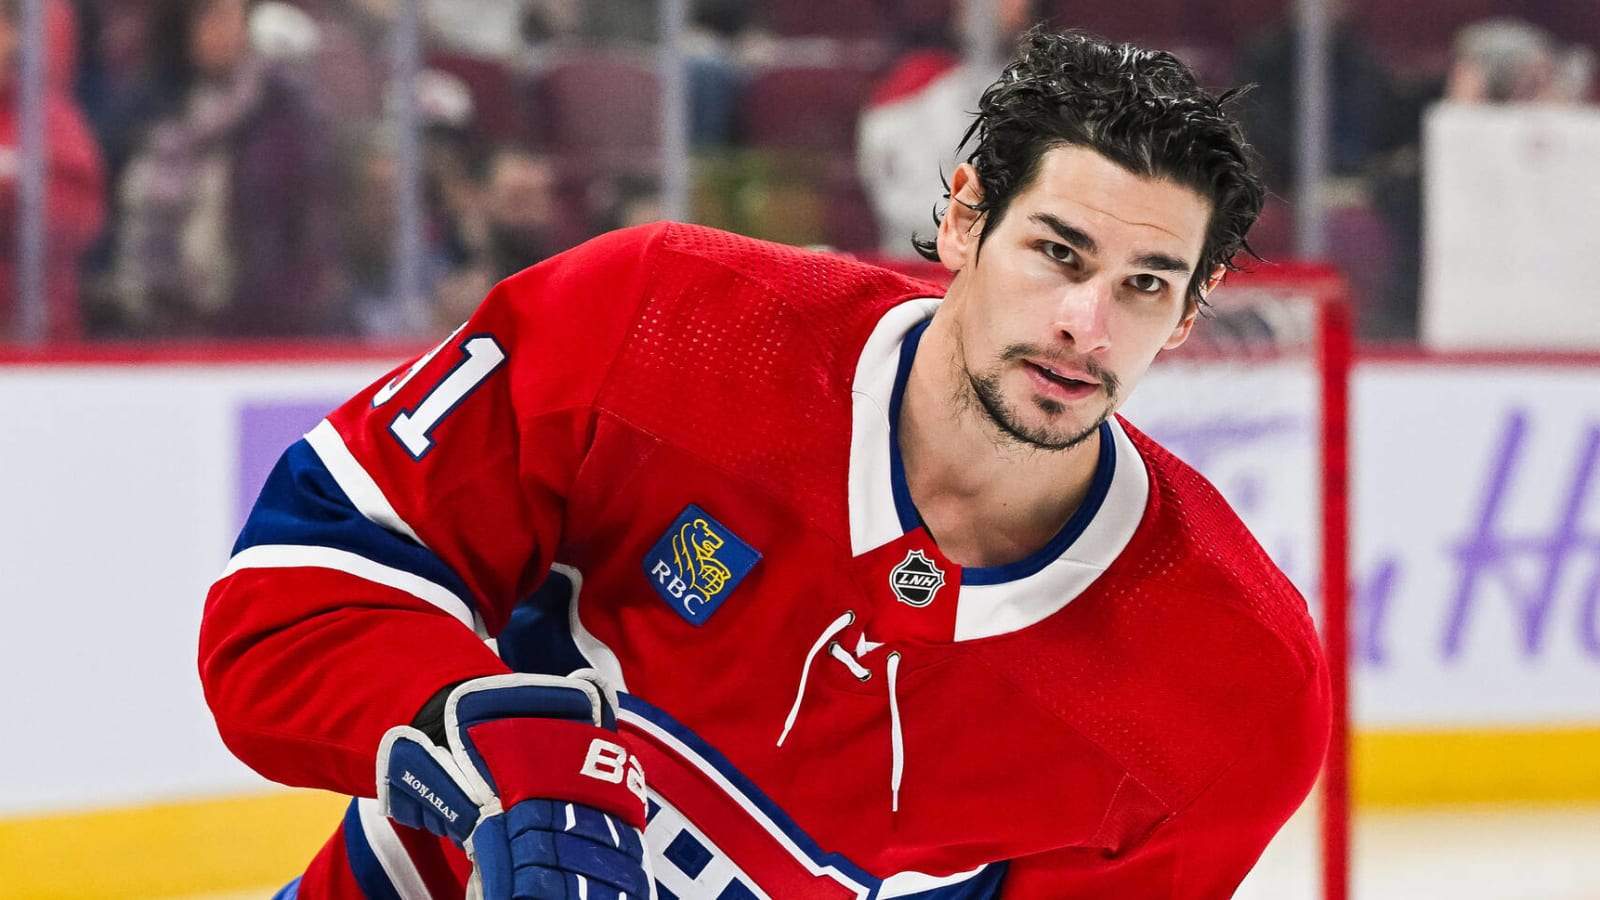 As Calgary competes, Canadiens also on a path to sell again at NHL’s trade deadline